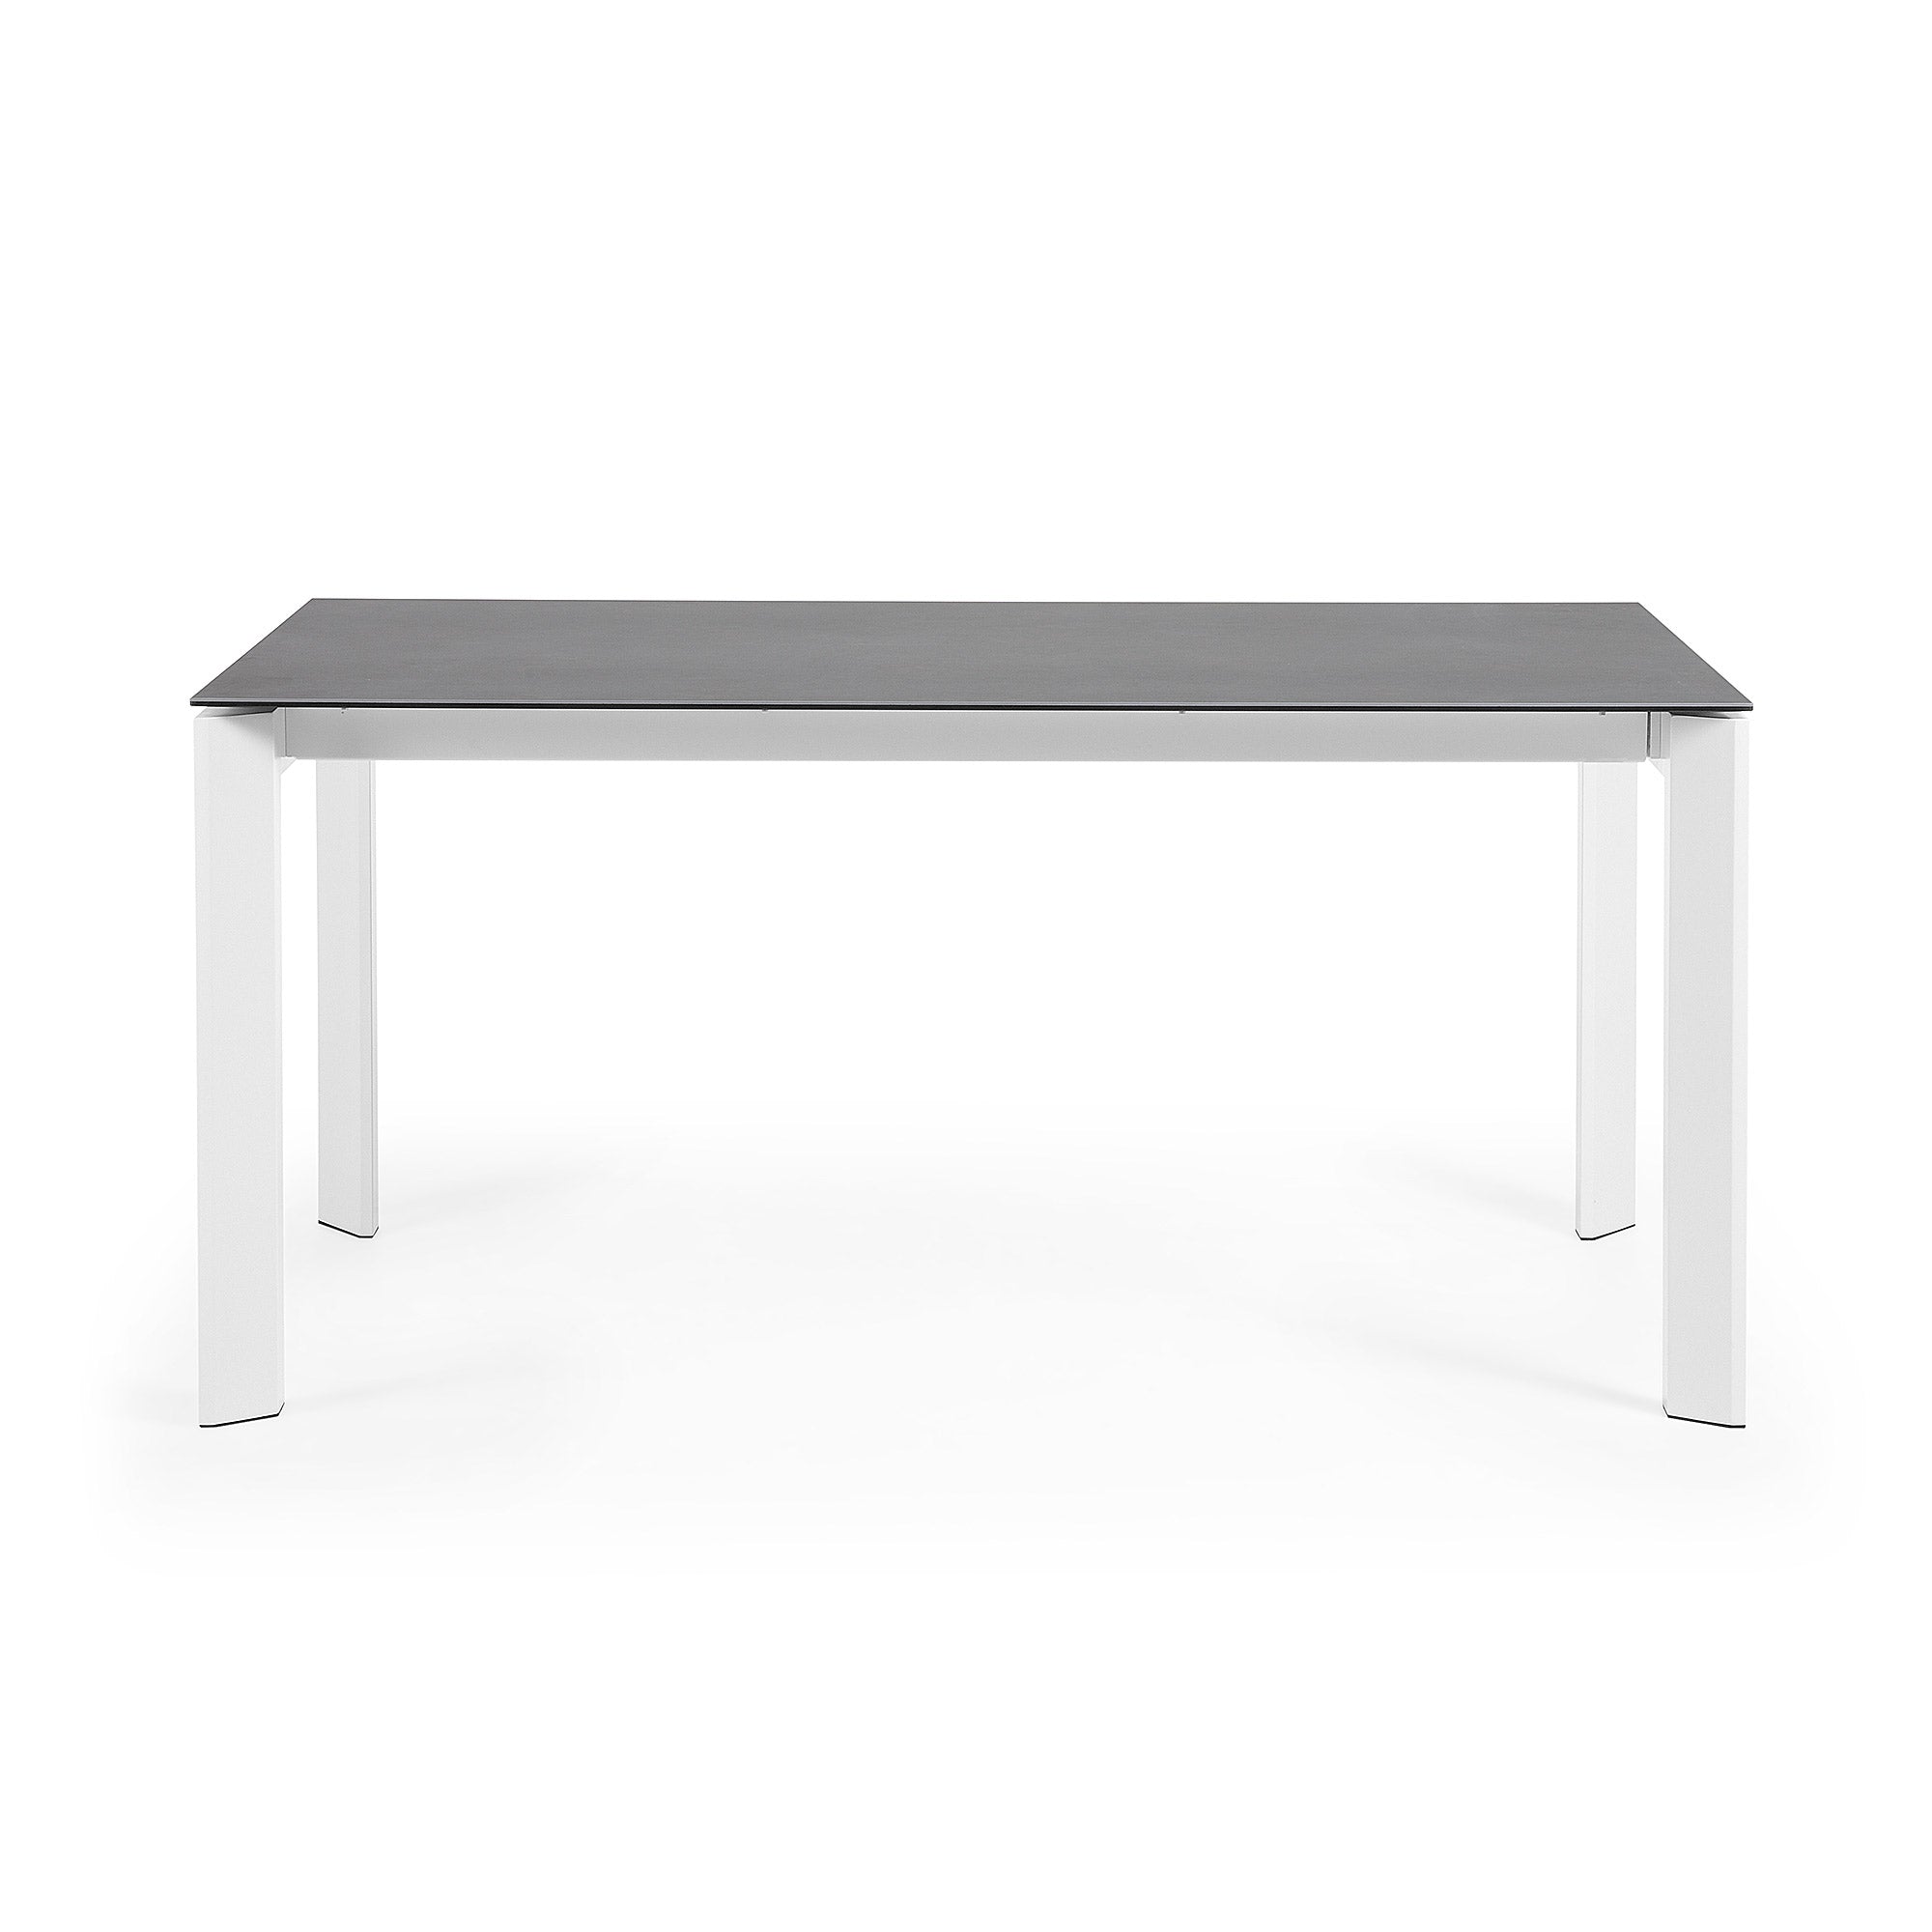 Axis porcelain extendable table in Volcano Rock finish with white legs 160 (220) cm